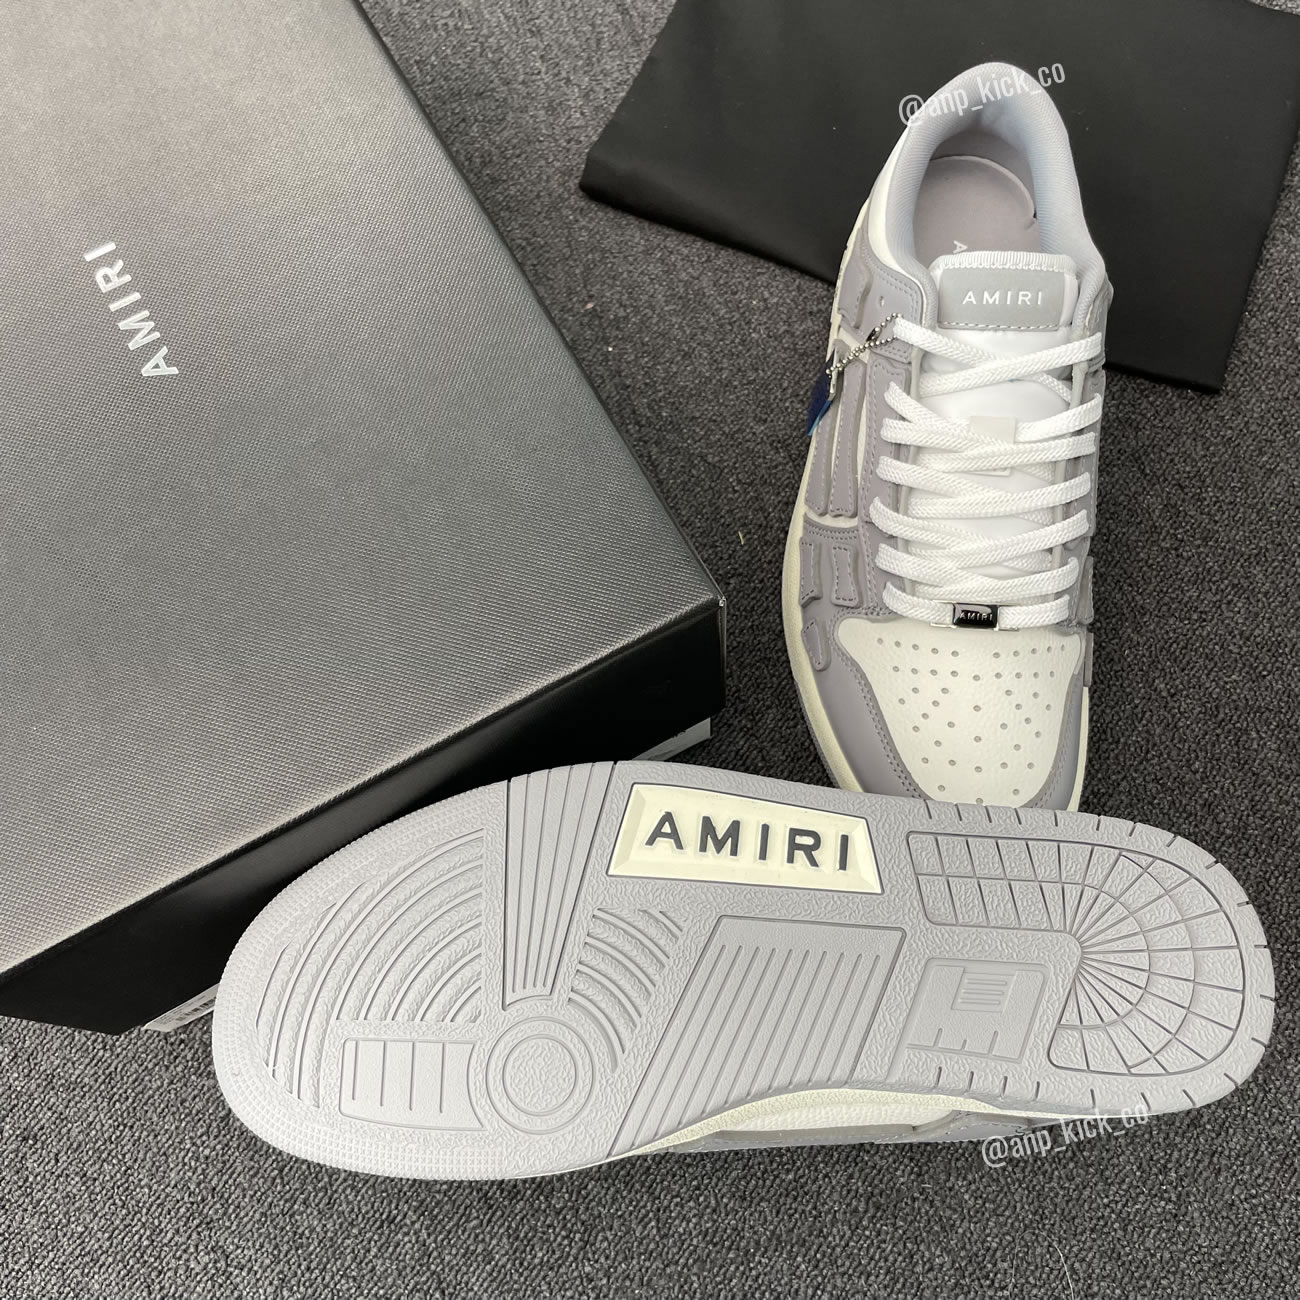 A M I R I Skel Top Low Leather Sneakers Grey White Anpkick Mfs003 043 (5) - newkick.org